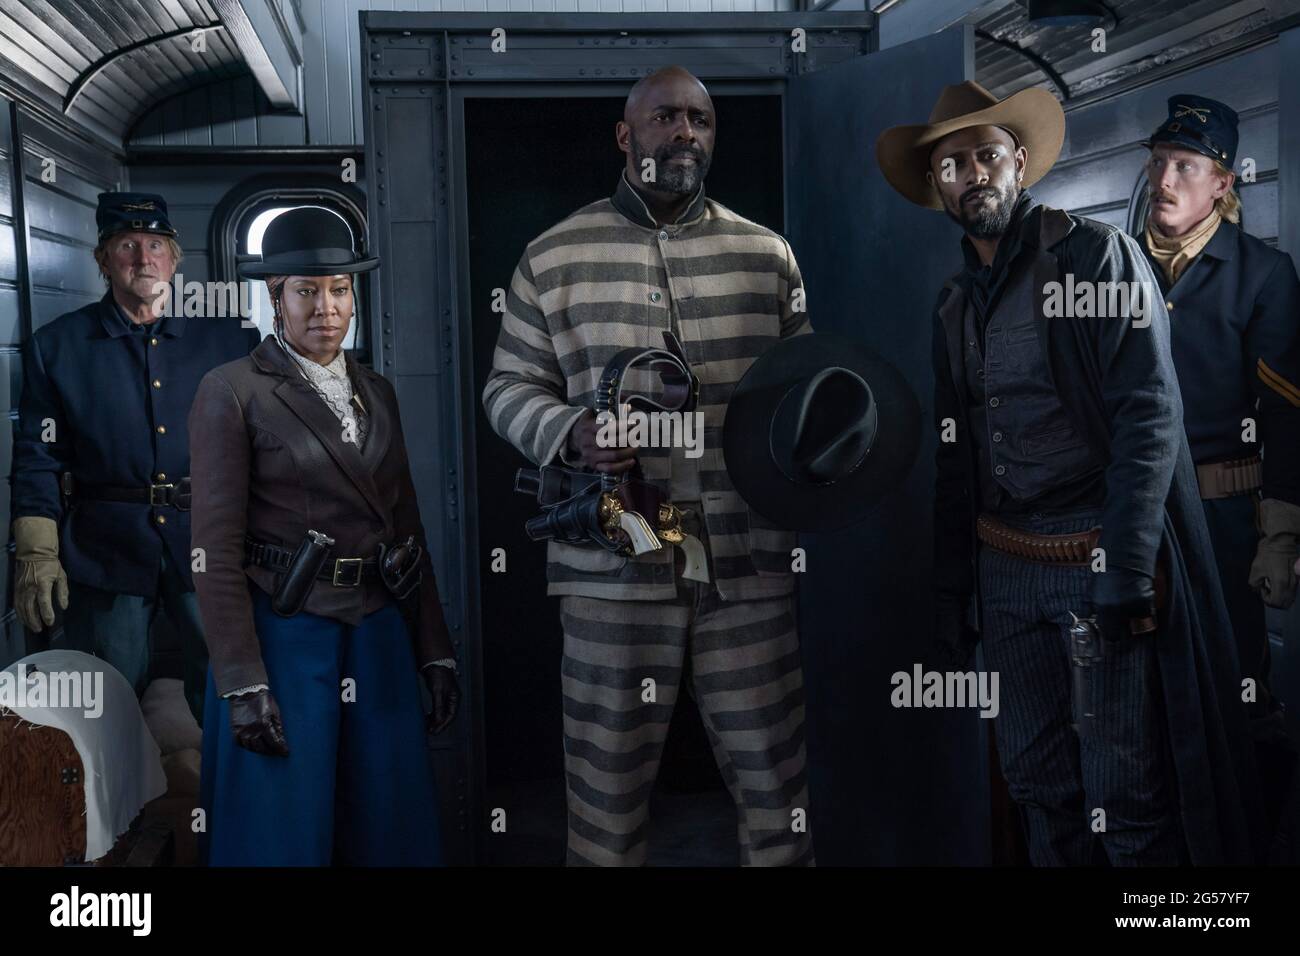 RELEASE DATE: 2021 TITLE: The Harder They Fall STUDIO: Netflix DIRECTOR: Jeymes Samuel PLOT: When an outlaw discovers his enemy is being released from prison, he reunites his gang to seek revenge in this Western. STARRING: REGINA KING, IDRIS ELBA, LAKEITH STANFIELD. (Credit Image: © Netflix/Entertainment Pictures) Stock Photo